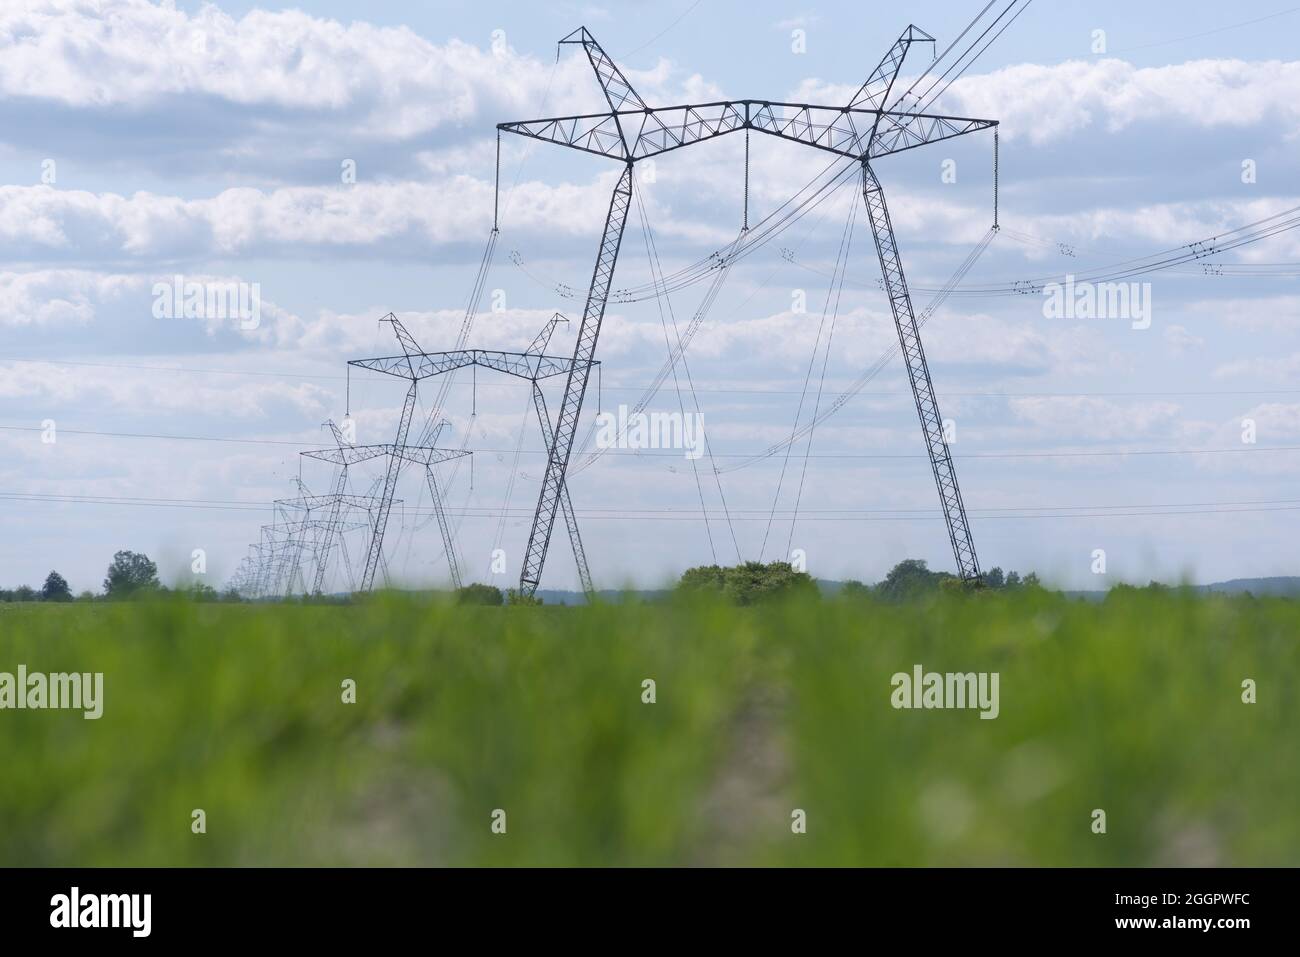 A view of power lines, electric power transmissions in a field in western Ukraine.Prime Minister of Ukraine, Denis Shmygal announced that from October 1st, the cost of electricity for 80% of the population will decrease following the Cabinet of Ministers passing a resolution which reduced the electricity tariff to UAH 1.44 per kilowatt/hour if households consume less than 250 kilowatt/hours per month. At the same time, if the household uses more than this norm, then all consumed electricity must be paid at full price - UAH 1.68 per kWh. (Photo by Mykola Tys/SOPA Images/Sipa USA) Stock Photo